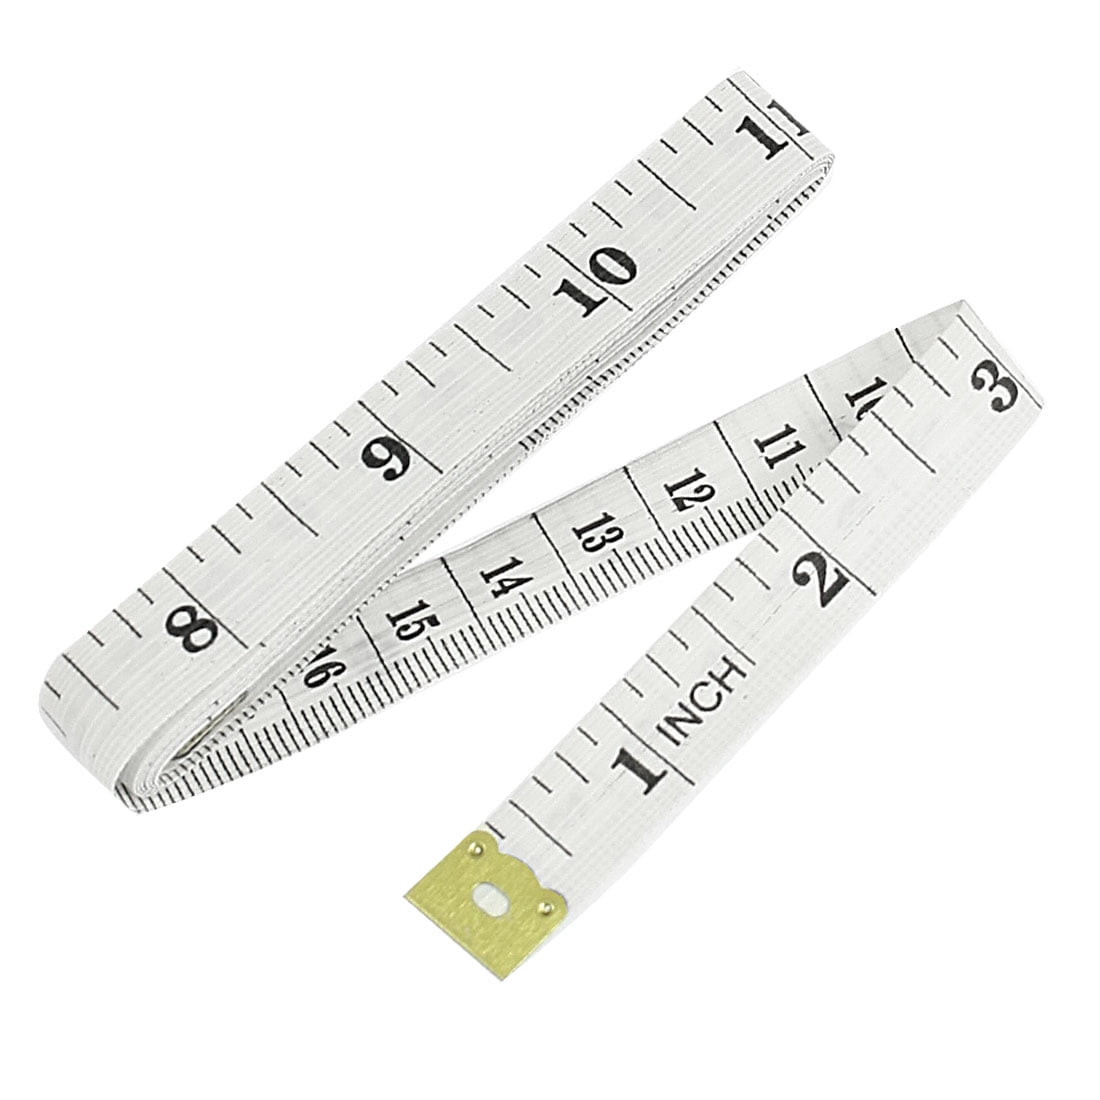 Unique Bargains 1.5m 60 inch Long White Plastic Tape Measure Tailor Sewing Ruler, Other